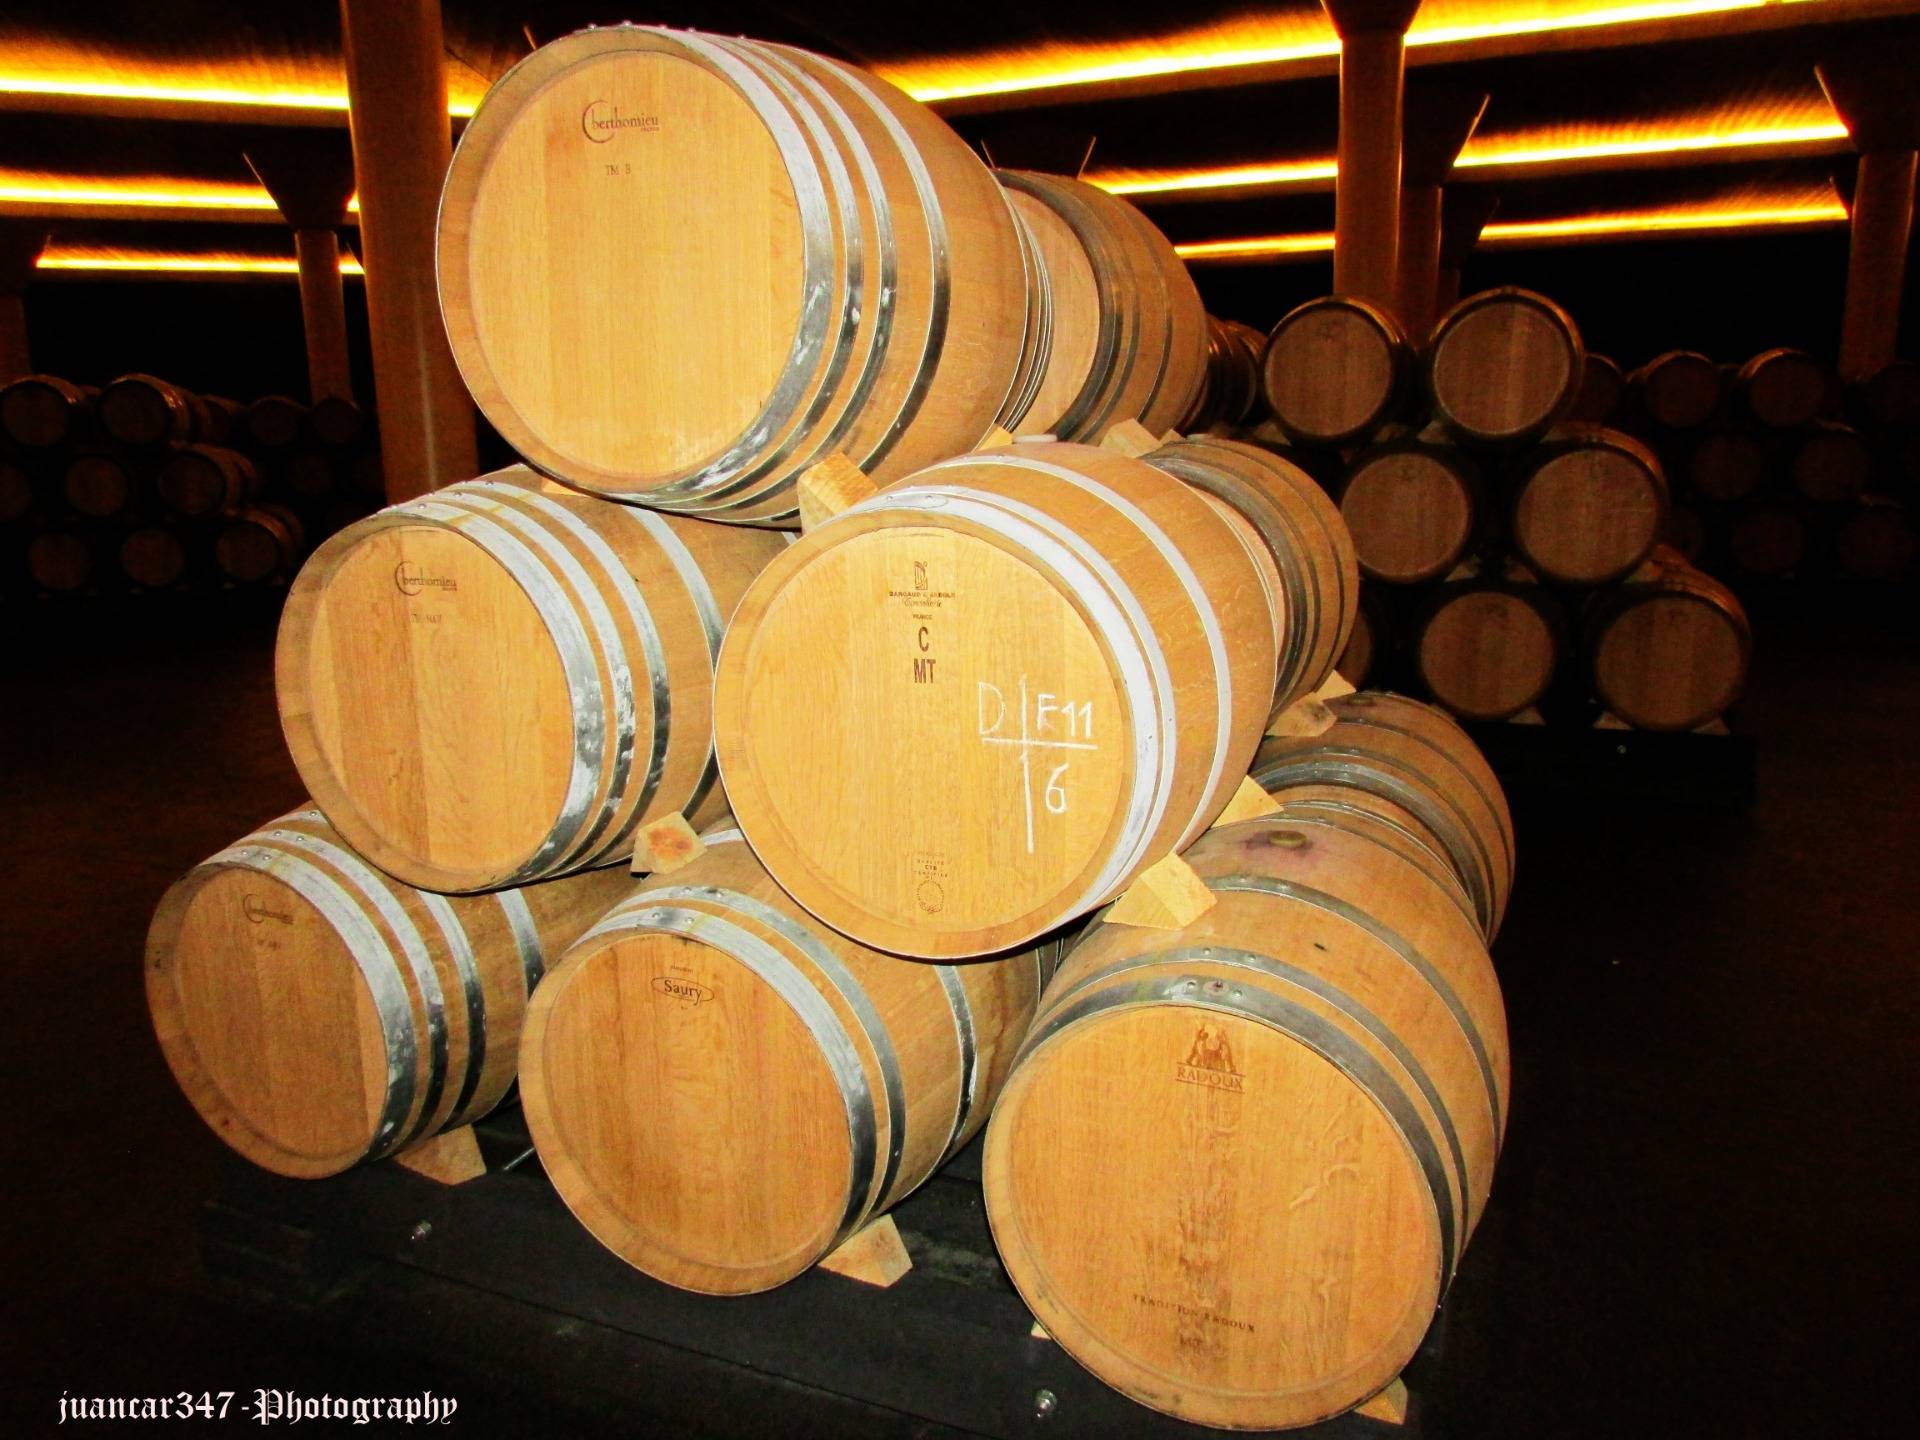 French oak barrels, which increase the richness of the flavor of the wine they keep